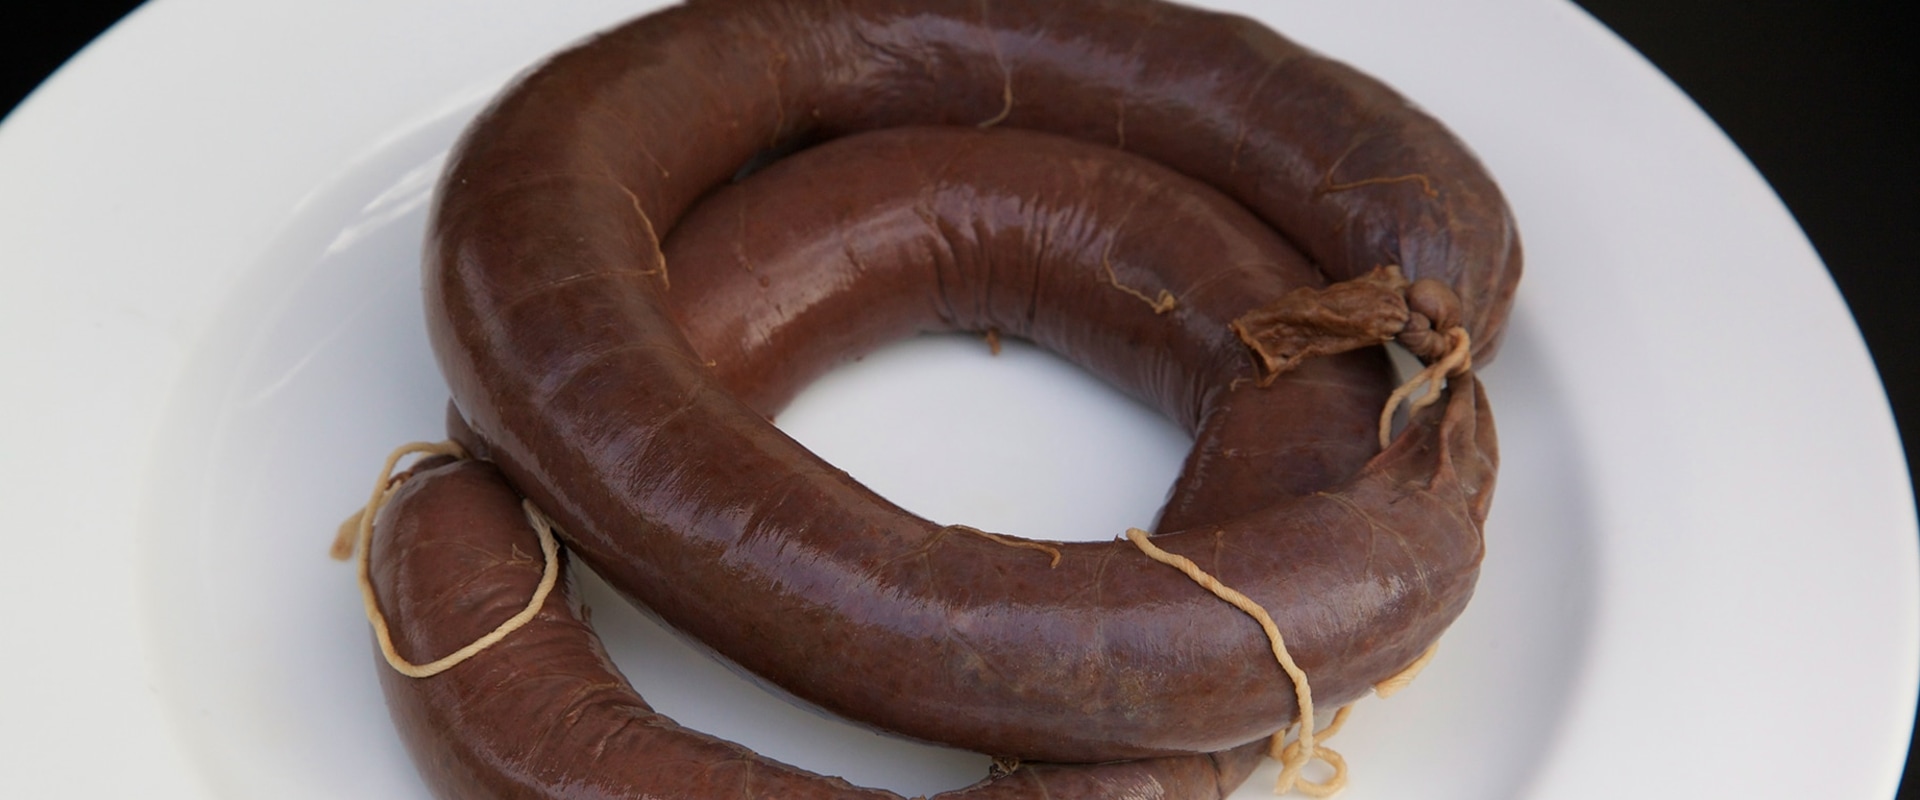 What is chinese blood sausage?